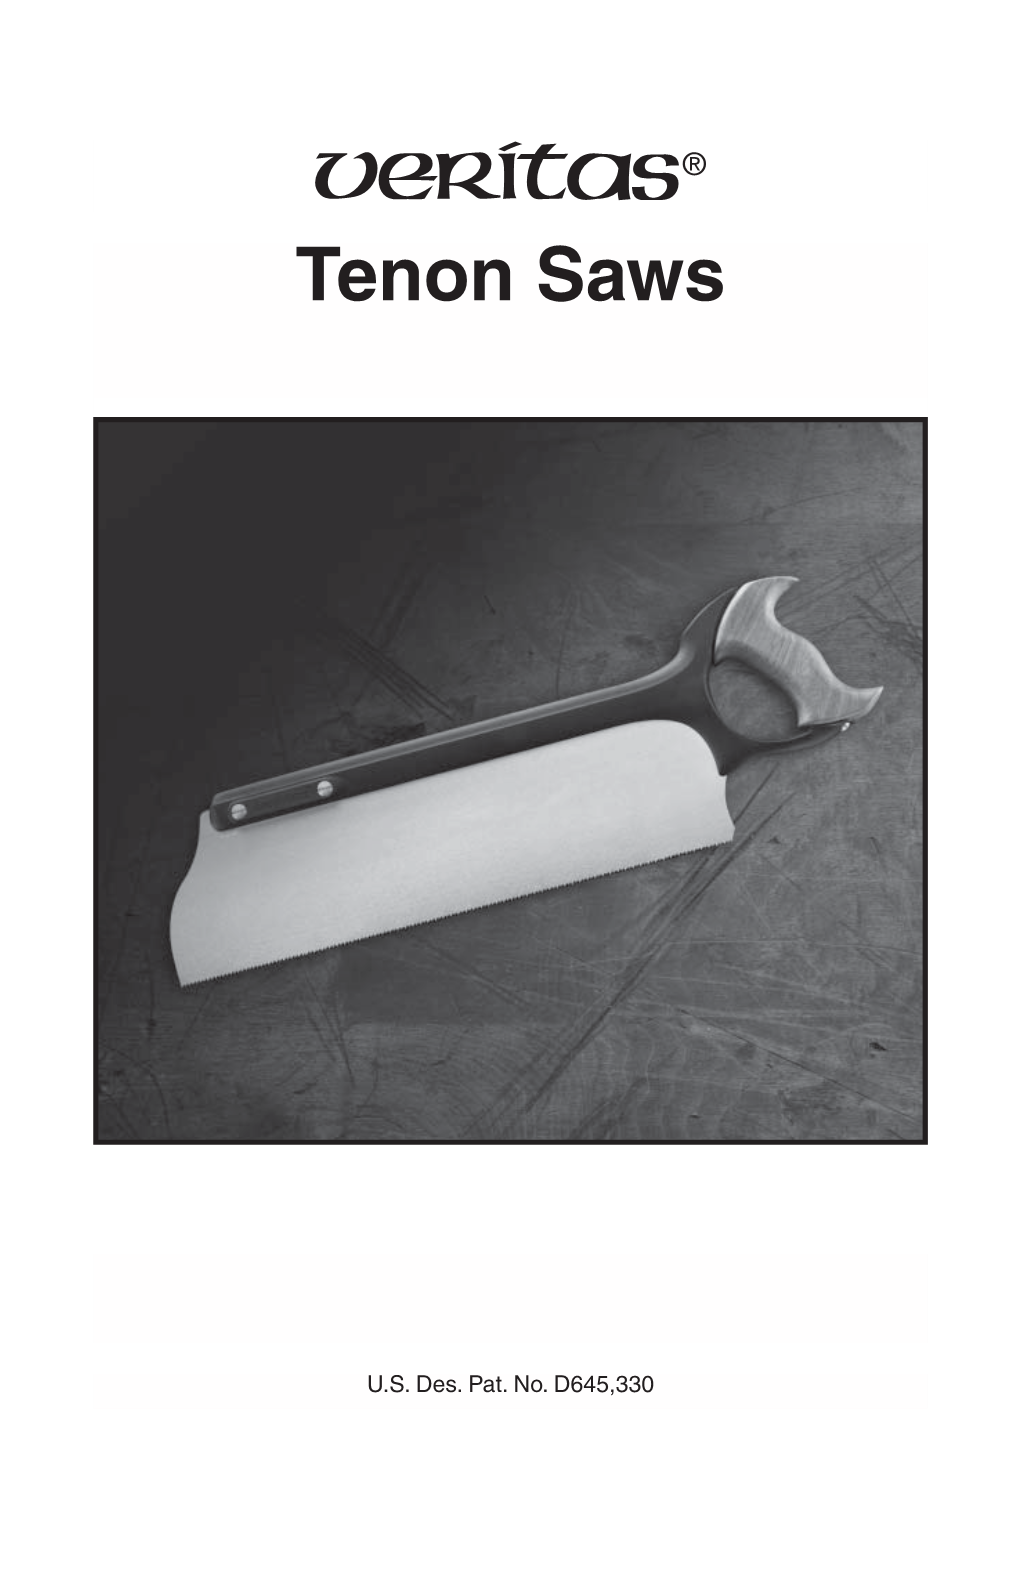 Tenon Saws Combine the Best Characteristics of the Classic ﬁ Ne Joinery Saw with Those of State-Of-The-Art Materials and Construction Methods